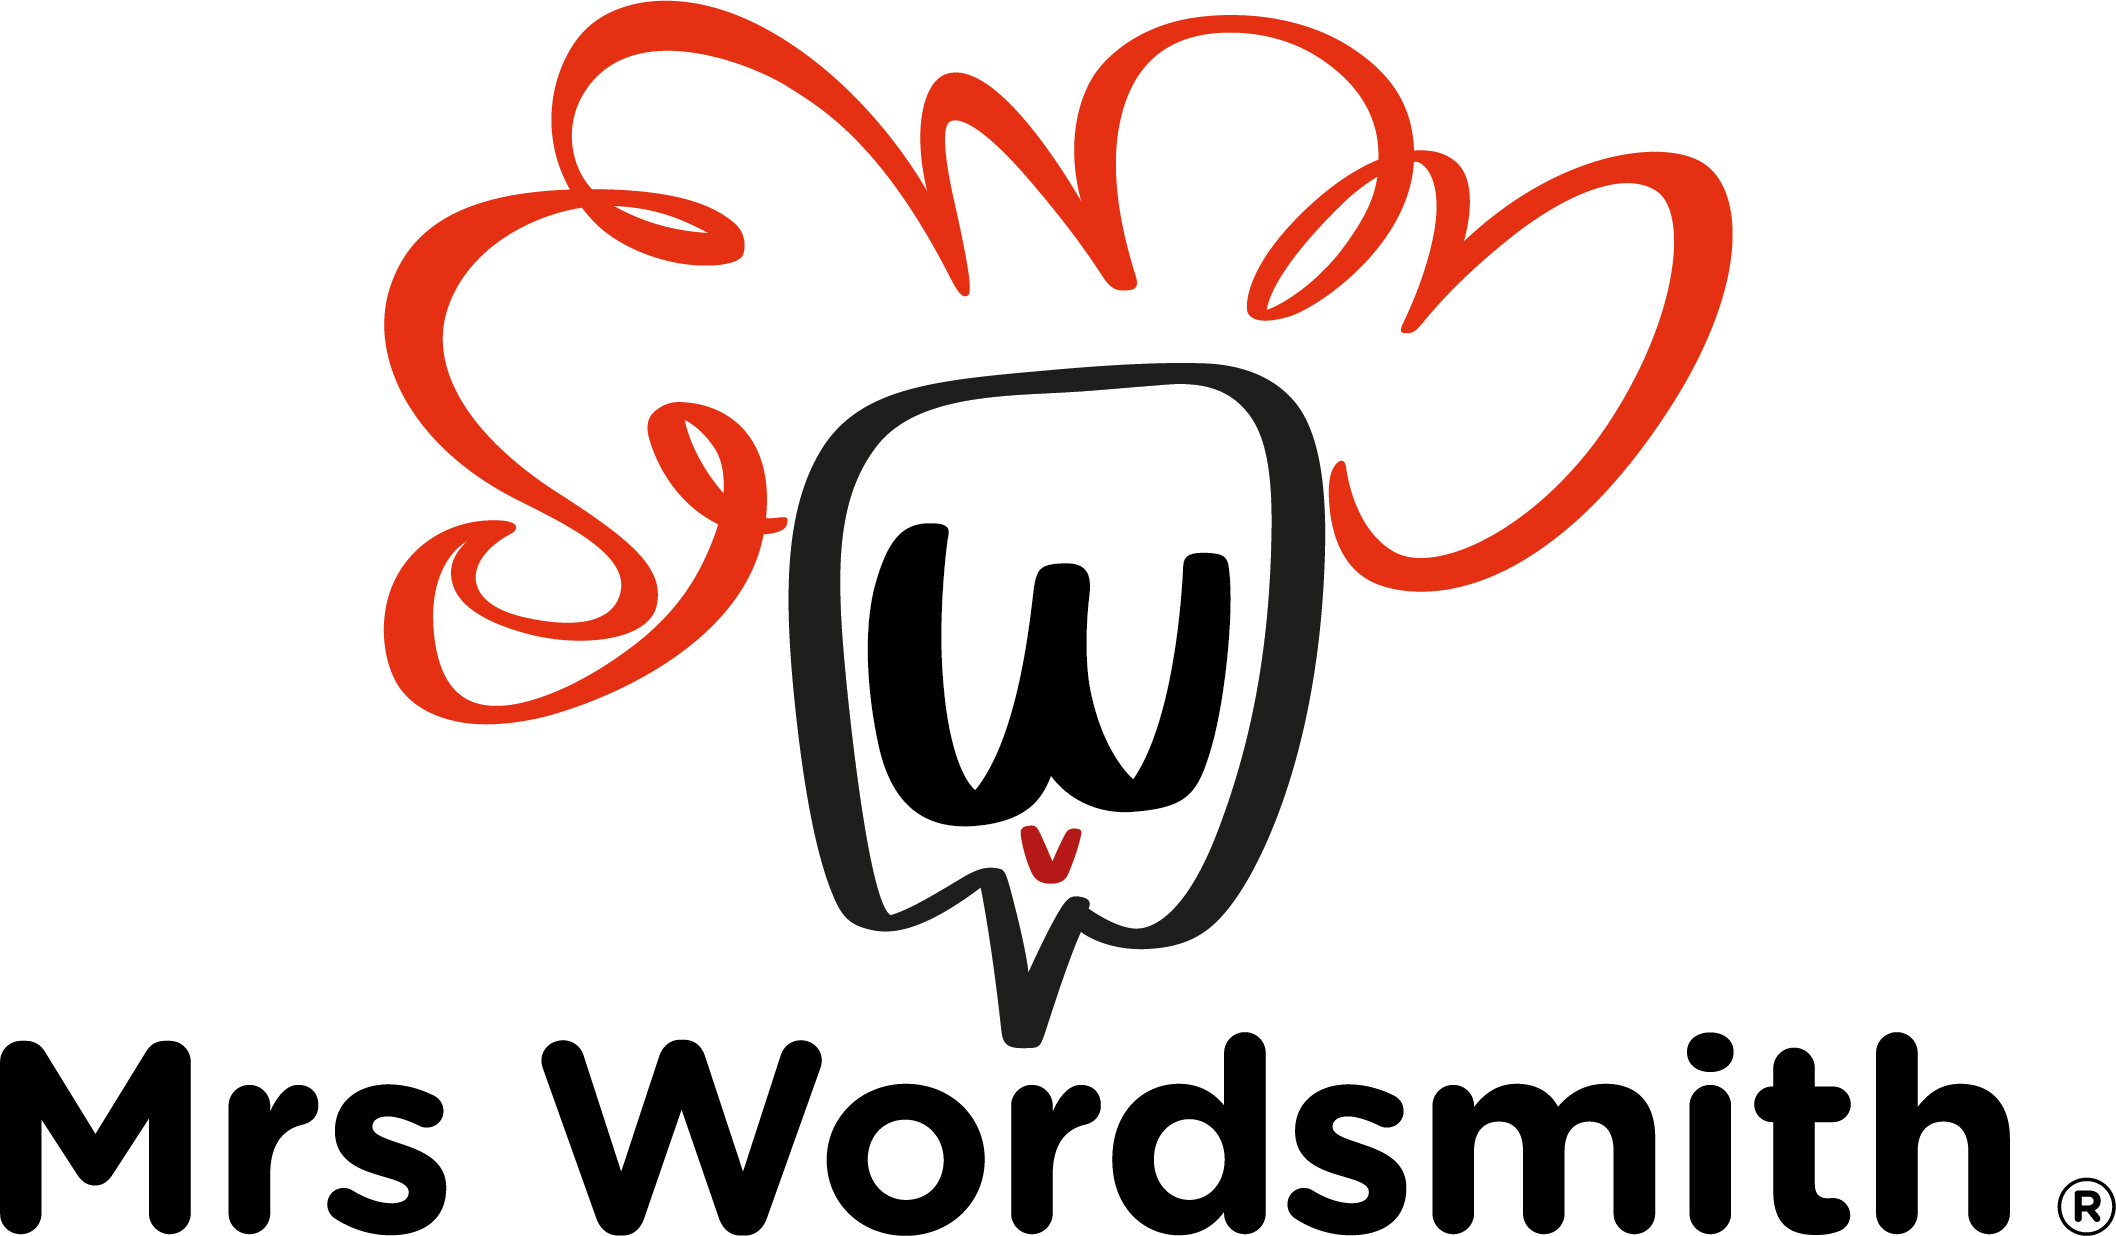 Edutainment Brand Mrs Wordsmith Raises $11M in Funding for U.S. and China  Expansion | Business Wire